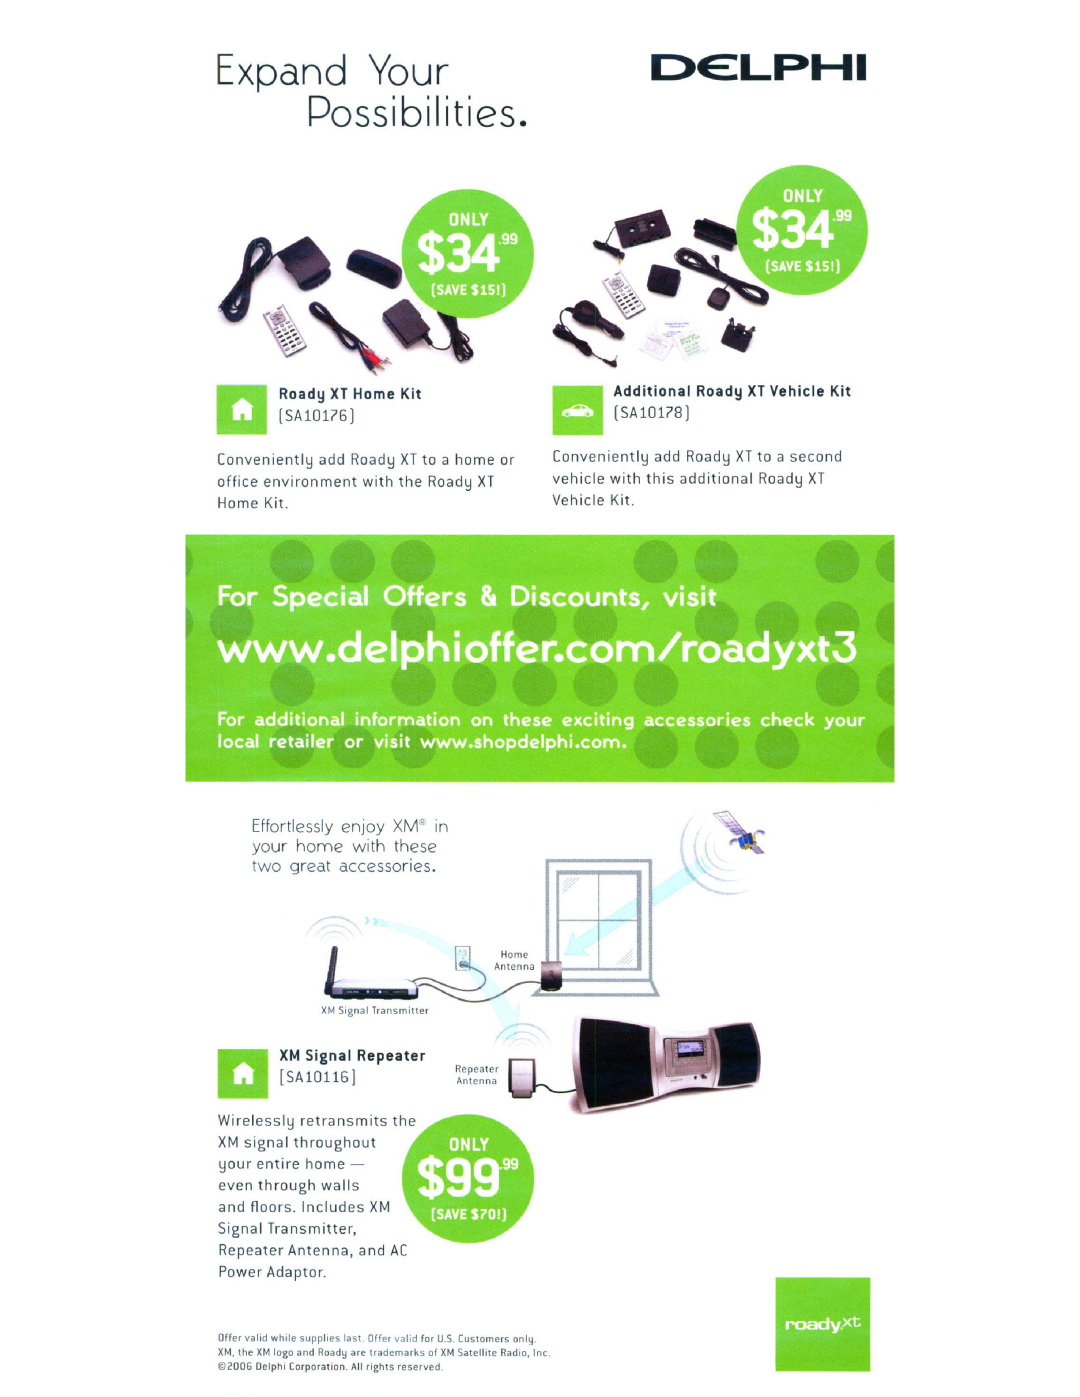 Delphi SA10201 Po55 ibiii tie, Expand YourDELPHI, For Special Offers & Discounts, visit, Roady XT Home Kit, SA10l?6 J 